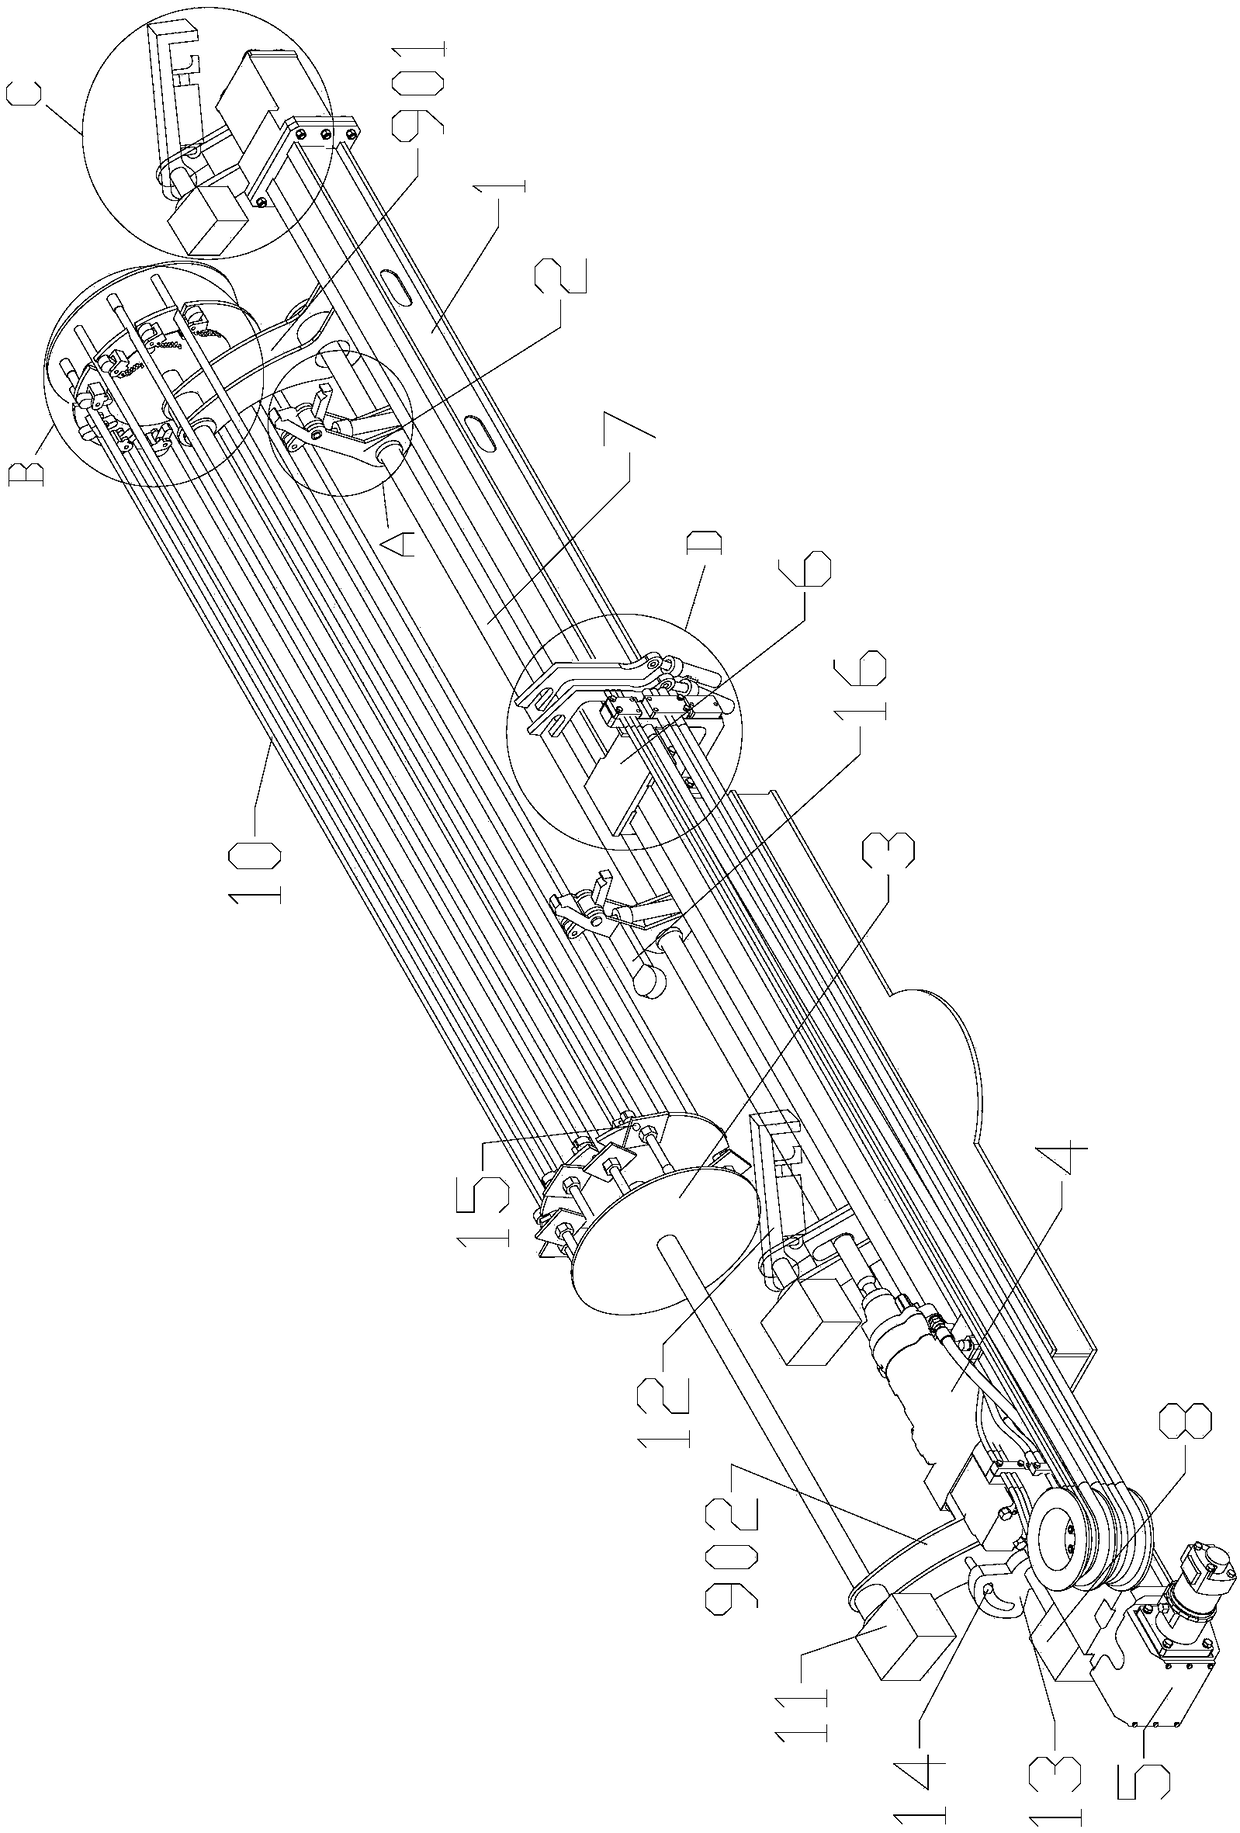 Anchor rod mounting device